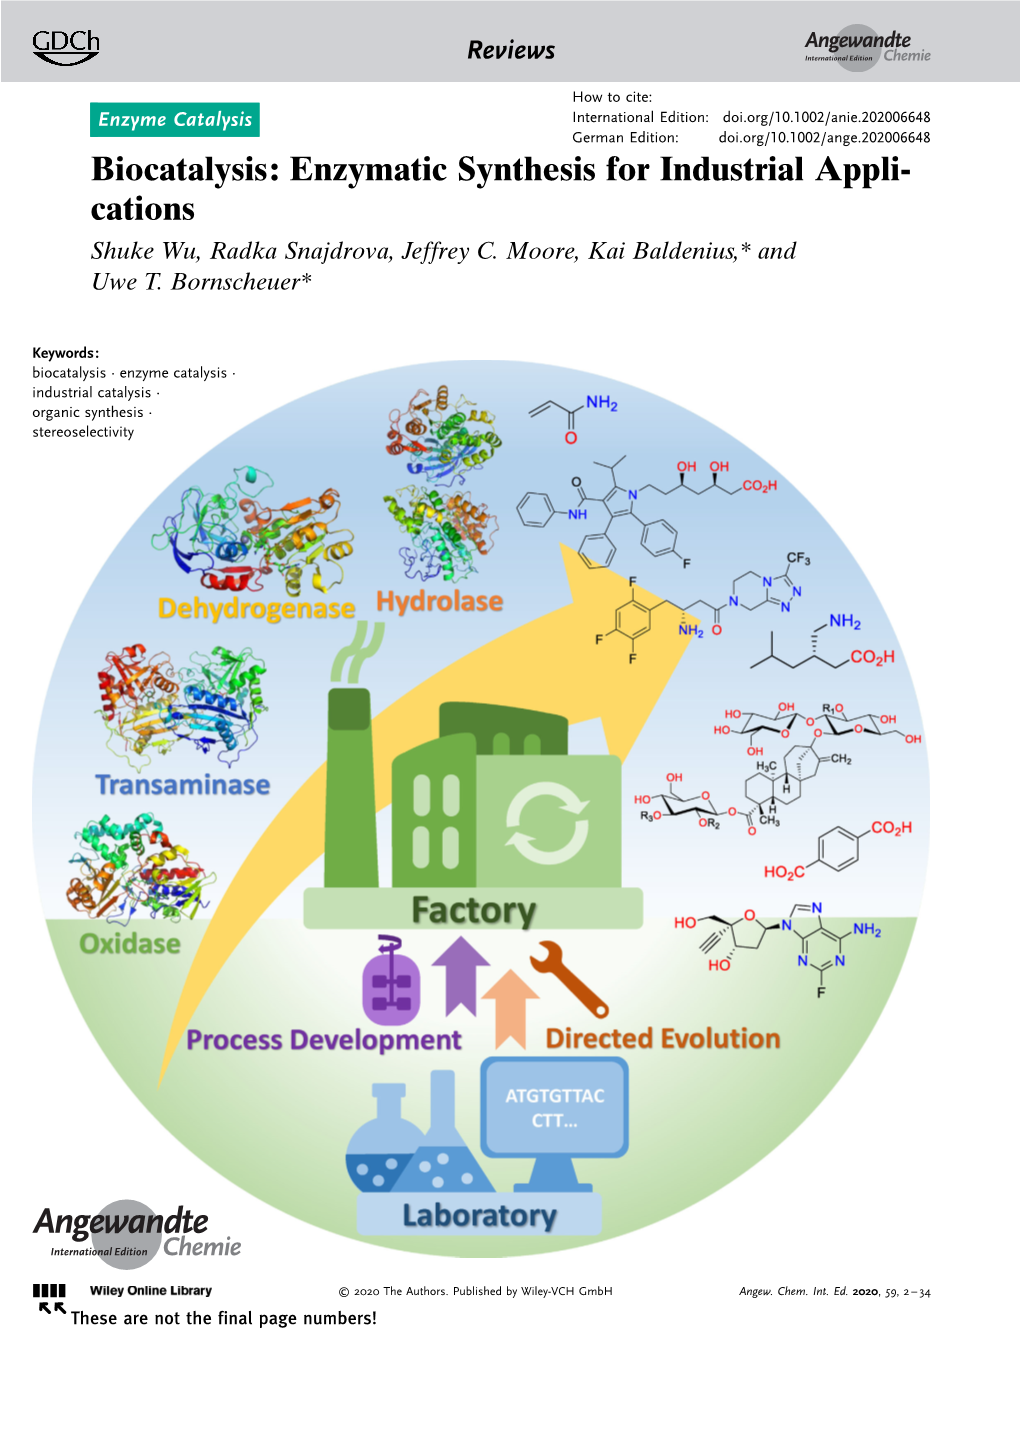 Biocatalysis: Enzymatic Synthesis for Industrial Applications